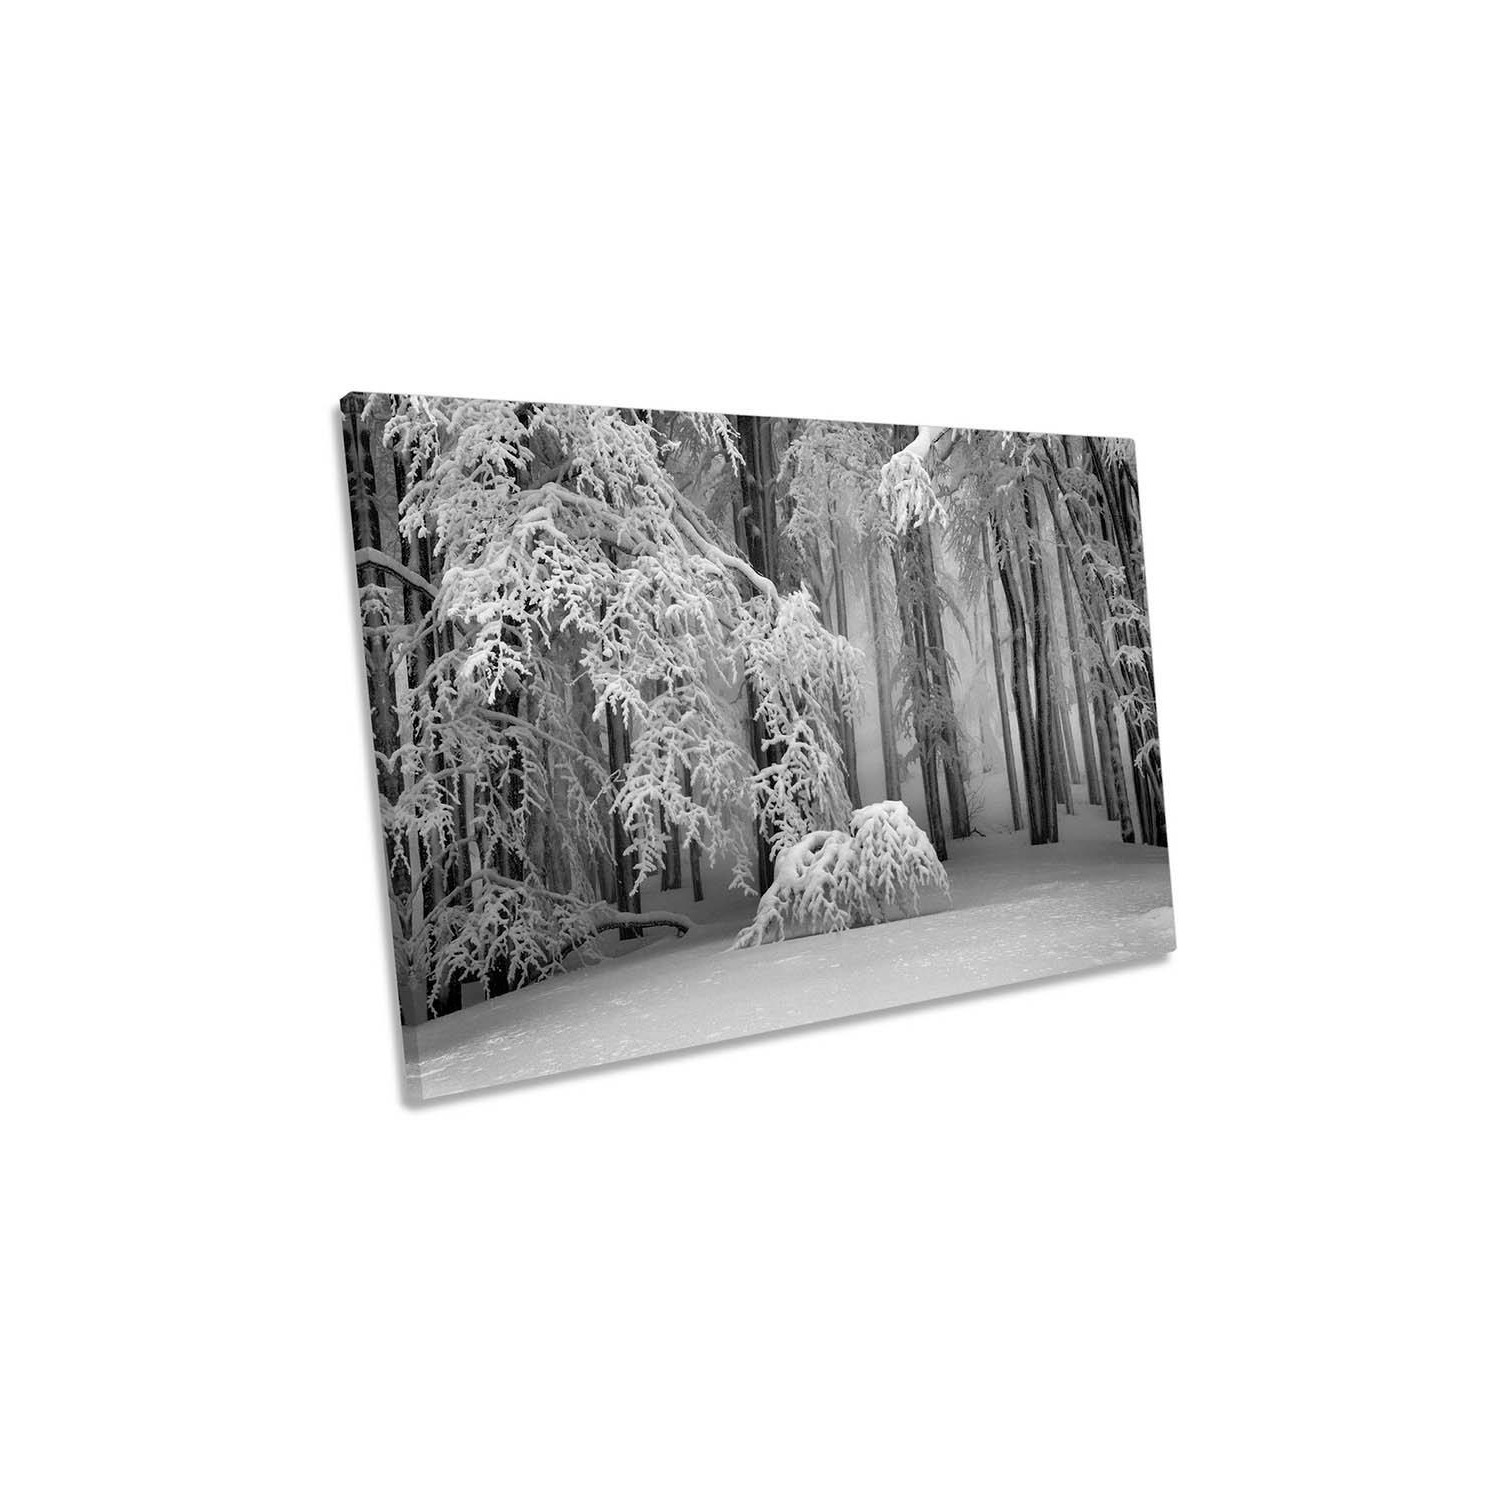 Perfect Winter Snow Landscape Forest Canvas Wall Art Picture Print - image 1